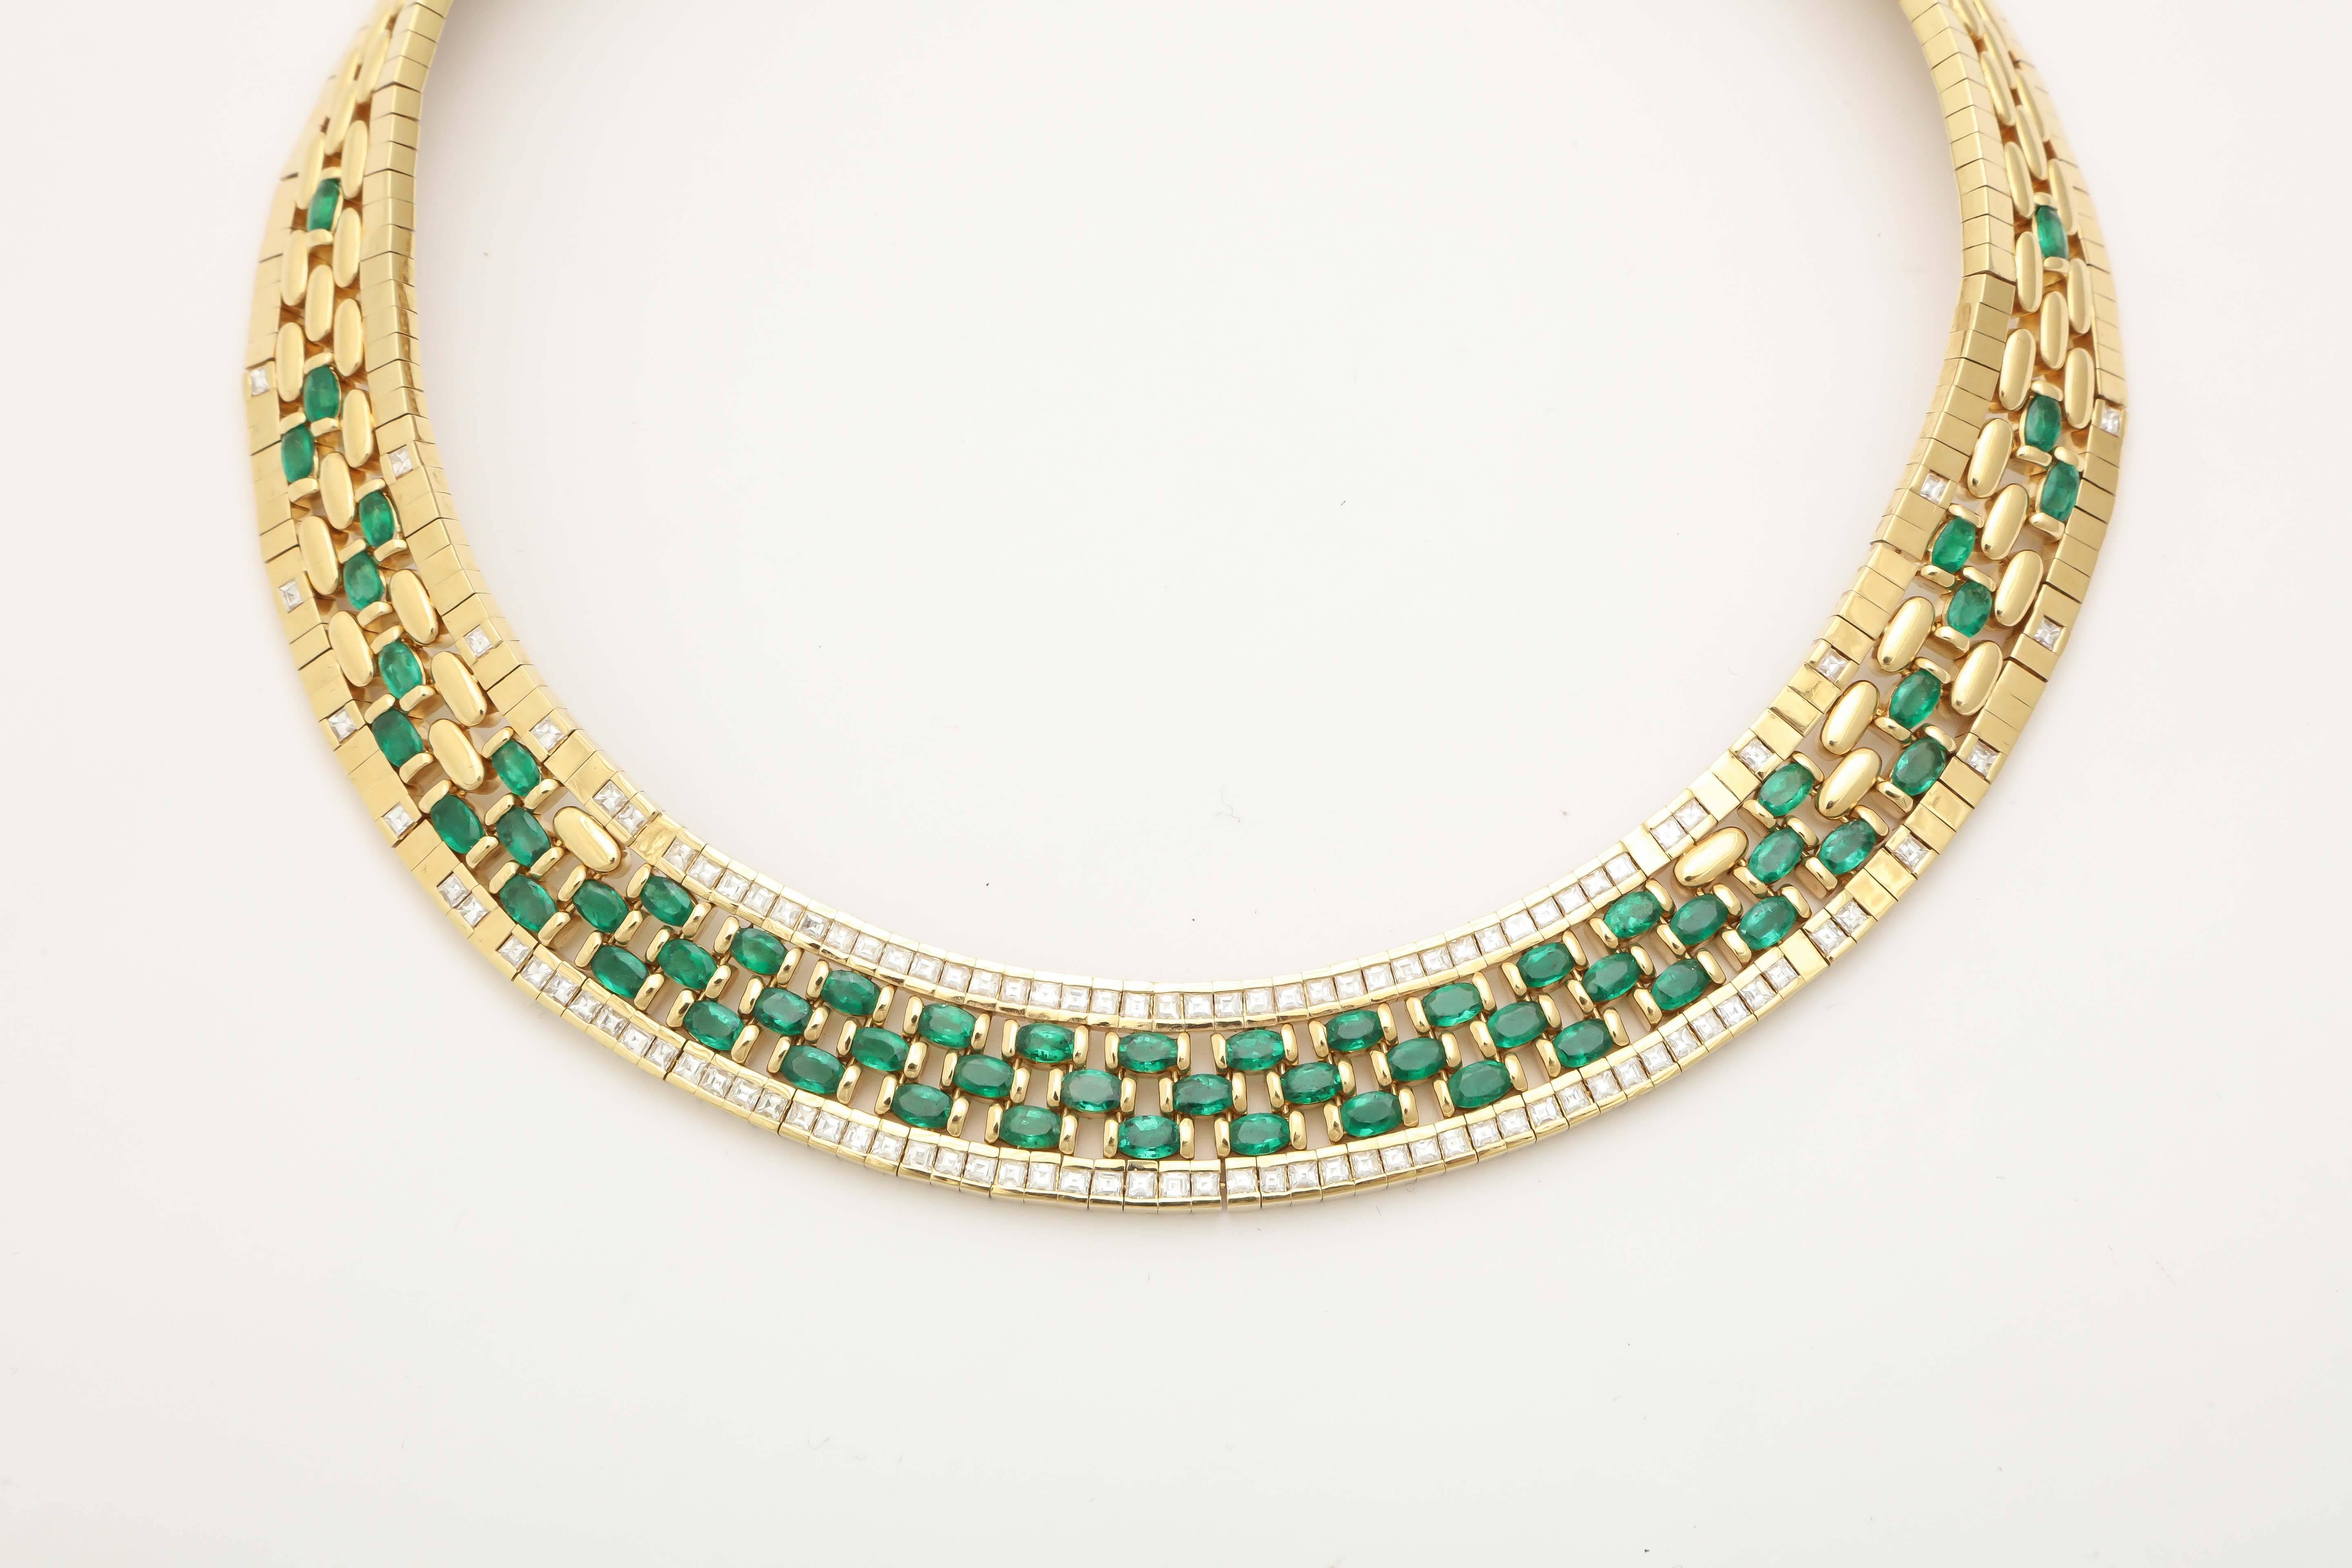 Elaborate 18kt Yellow Gold Necklace, highly polished,  with alternating Emeralds & Diamonds interwoven into a complex & colorful Tapestry.  99 square cut clean & white Diamonds weighing approximately a total of 7cts framing alternating Emerald &